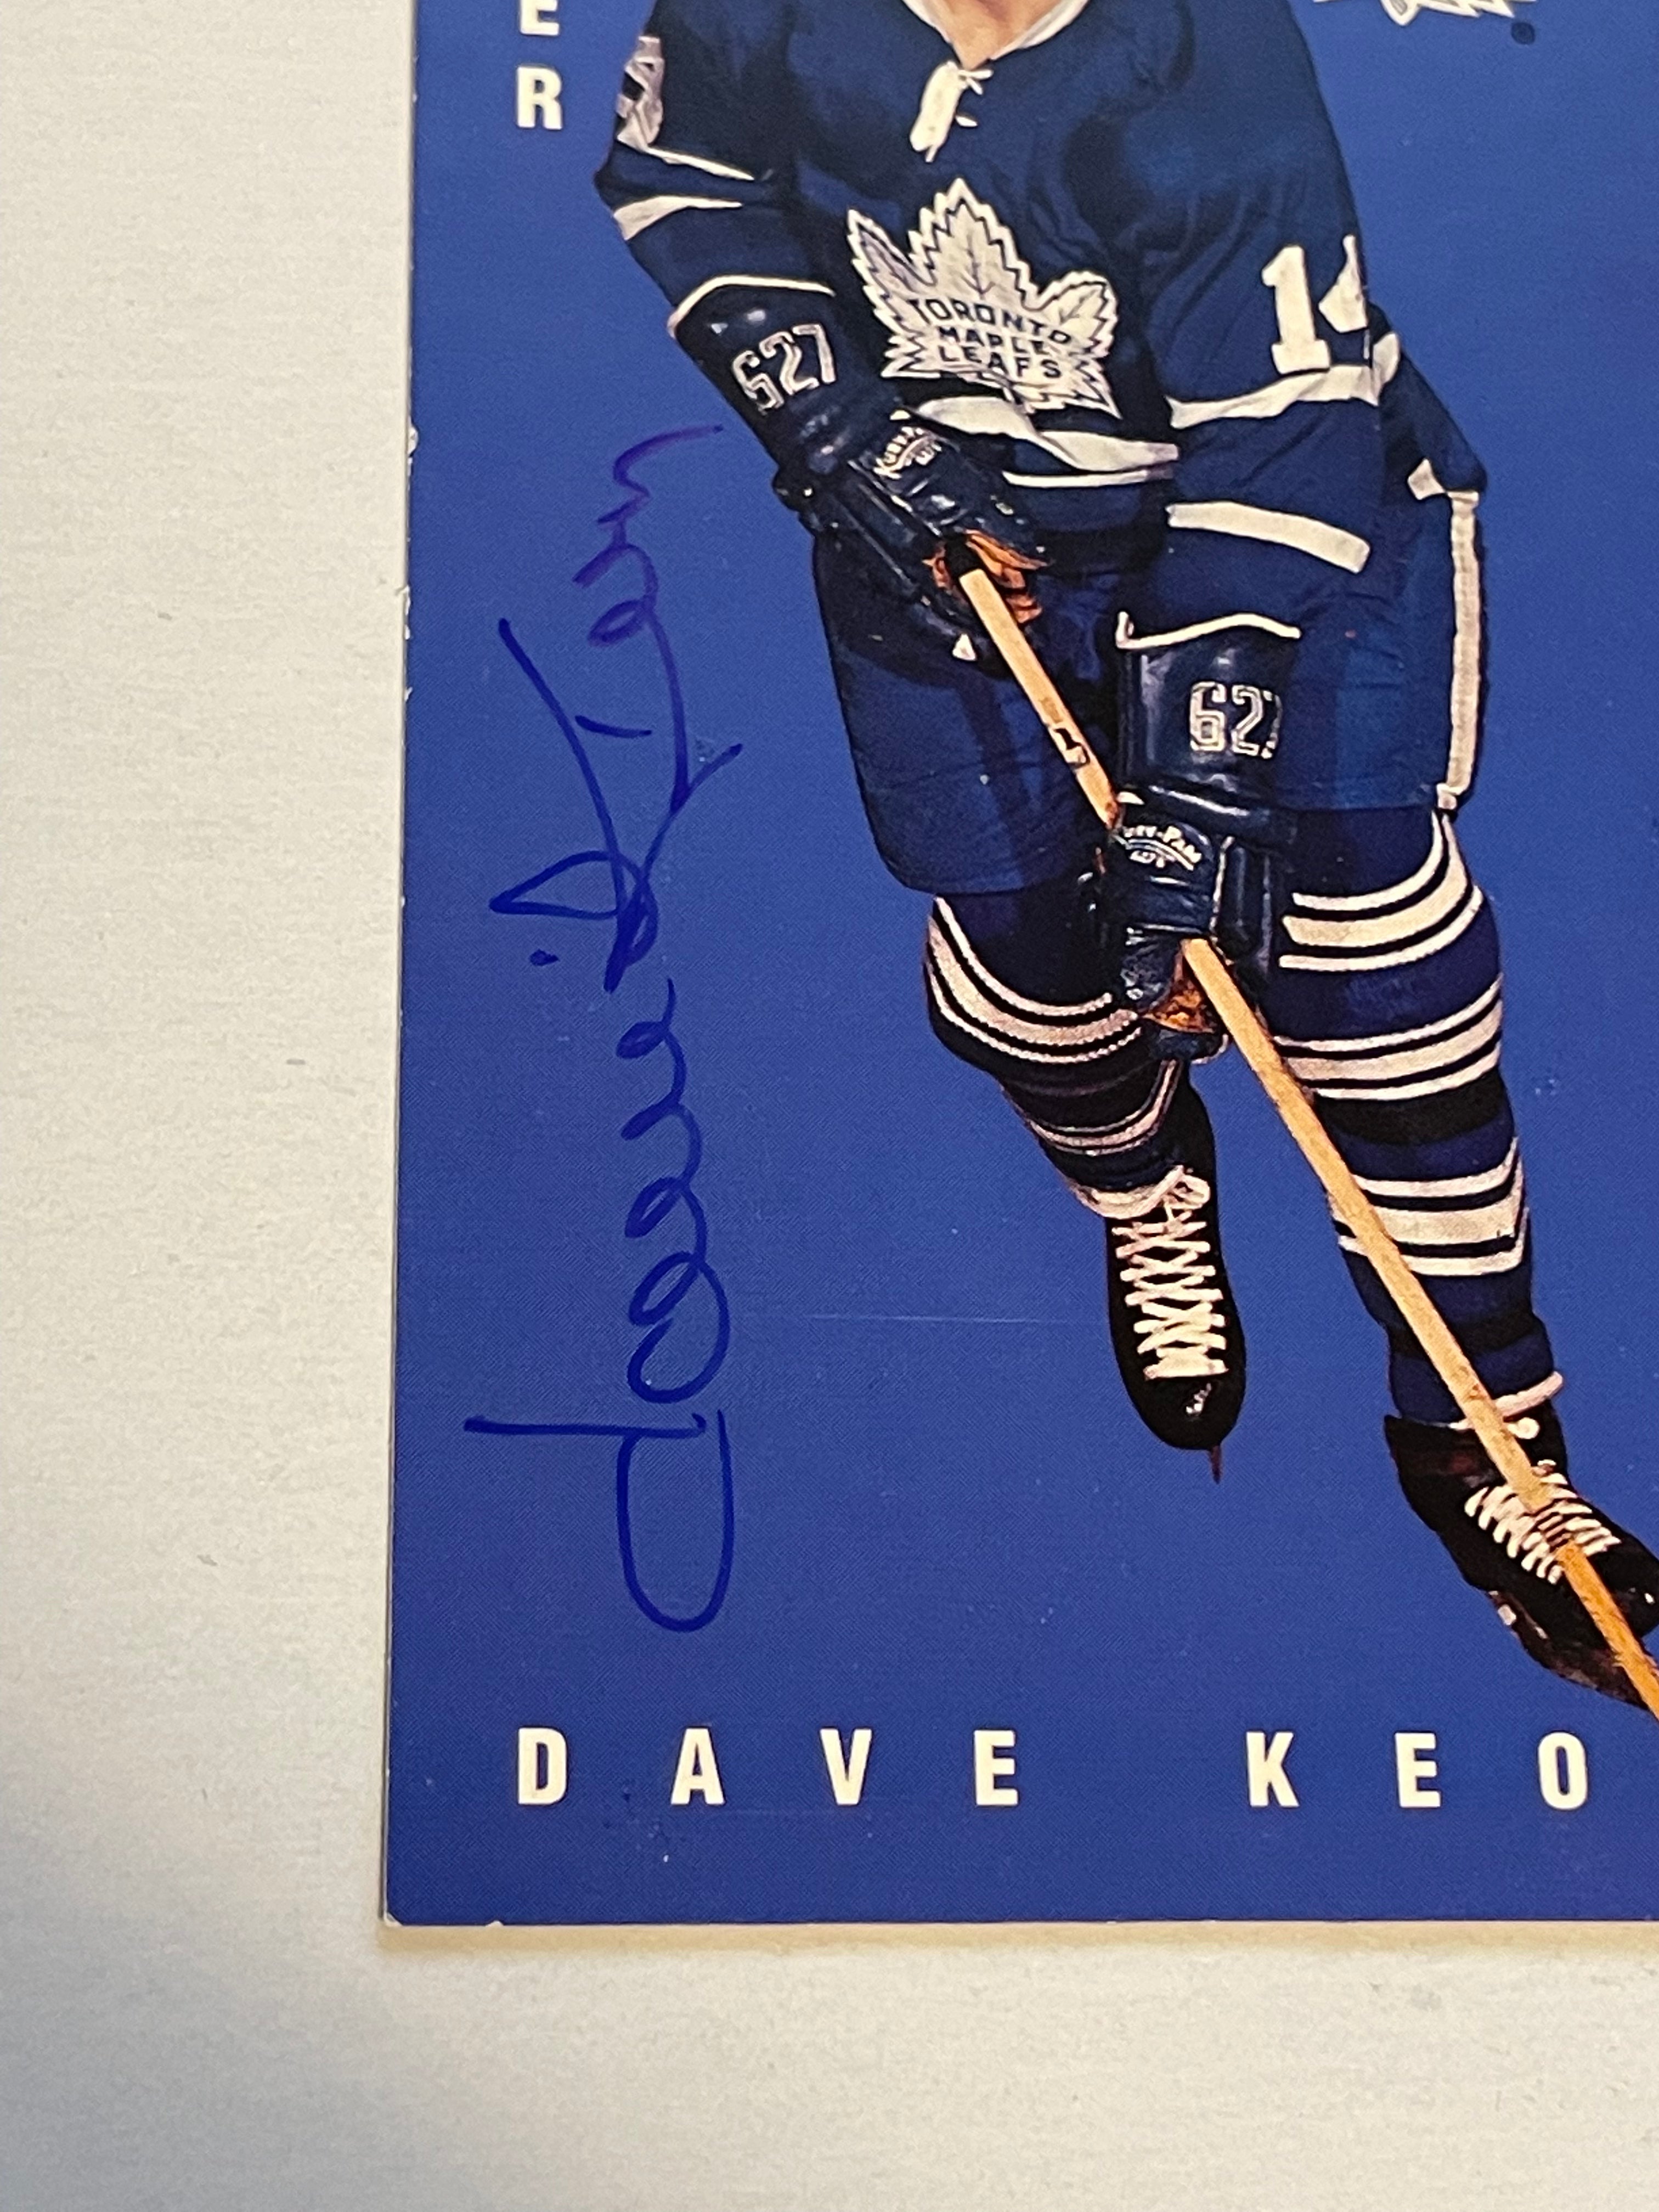 Dave Keon Toronto Maple Leafs autograph card with COA